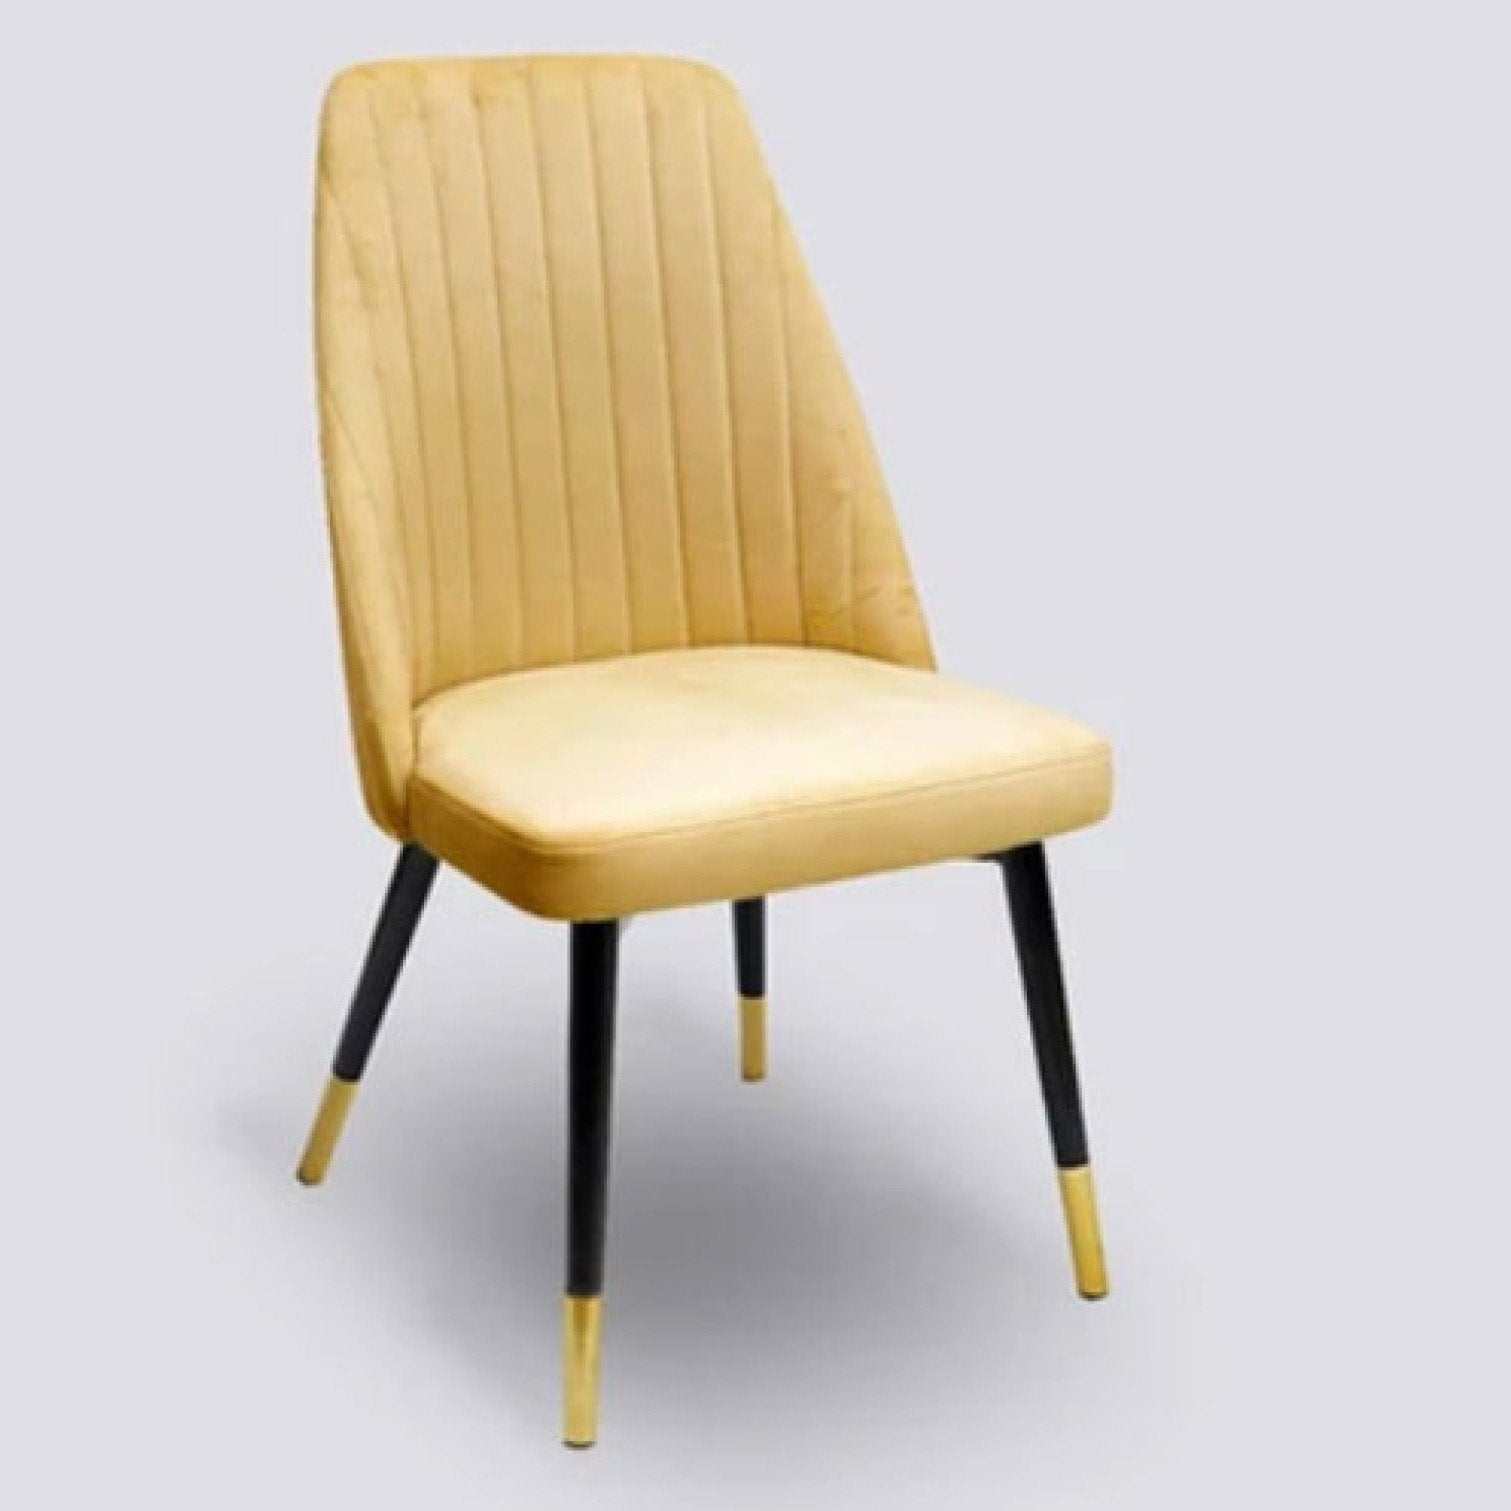 LUX-489 DINING CHAIR Mobel Furniture